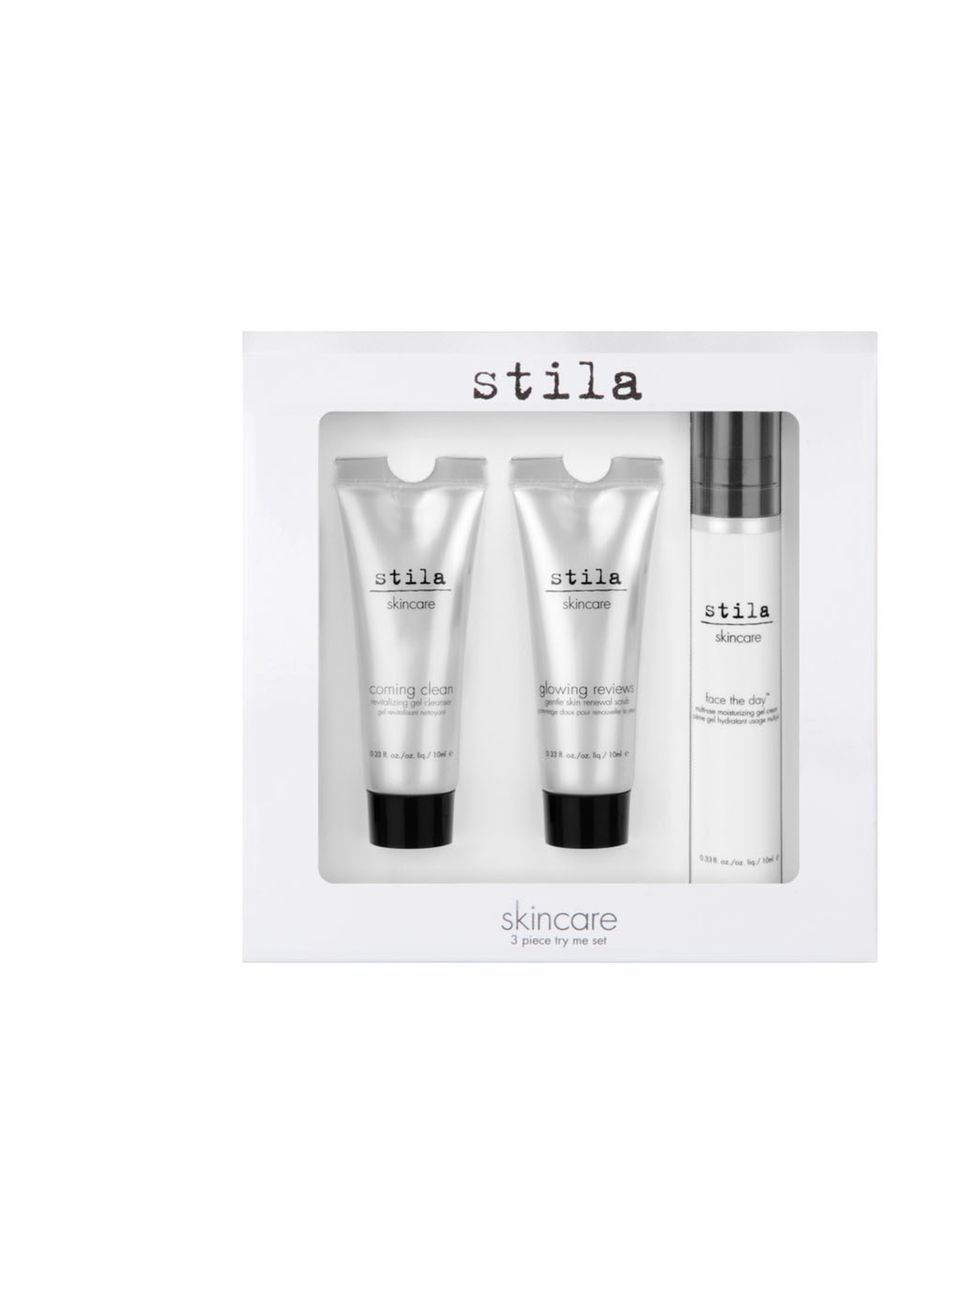 <p><a href="http://www.theukedit.com/stila-skincare-try-me-set-3-products/10659067.html">Stila Skincare Try Me Set £10</a></p><p>Dreading the damage our British weather could bring to your skin? Fear not, Stilas three-piece set including a cleanser, scru